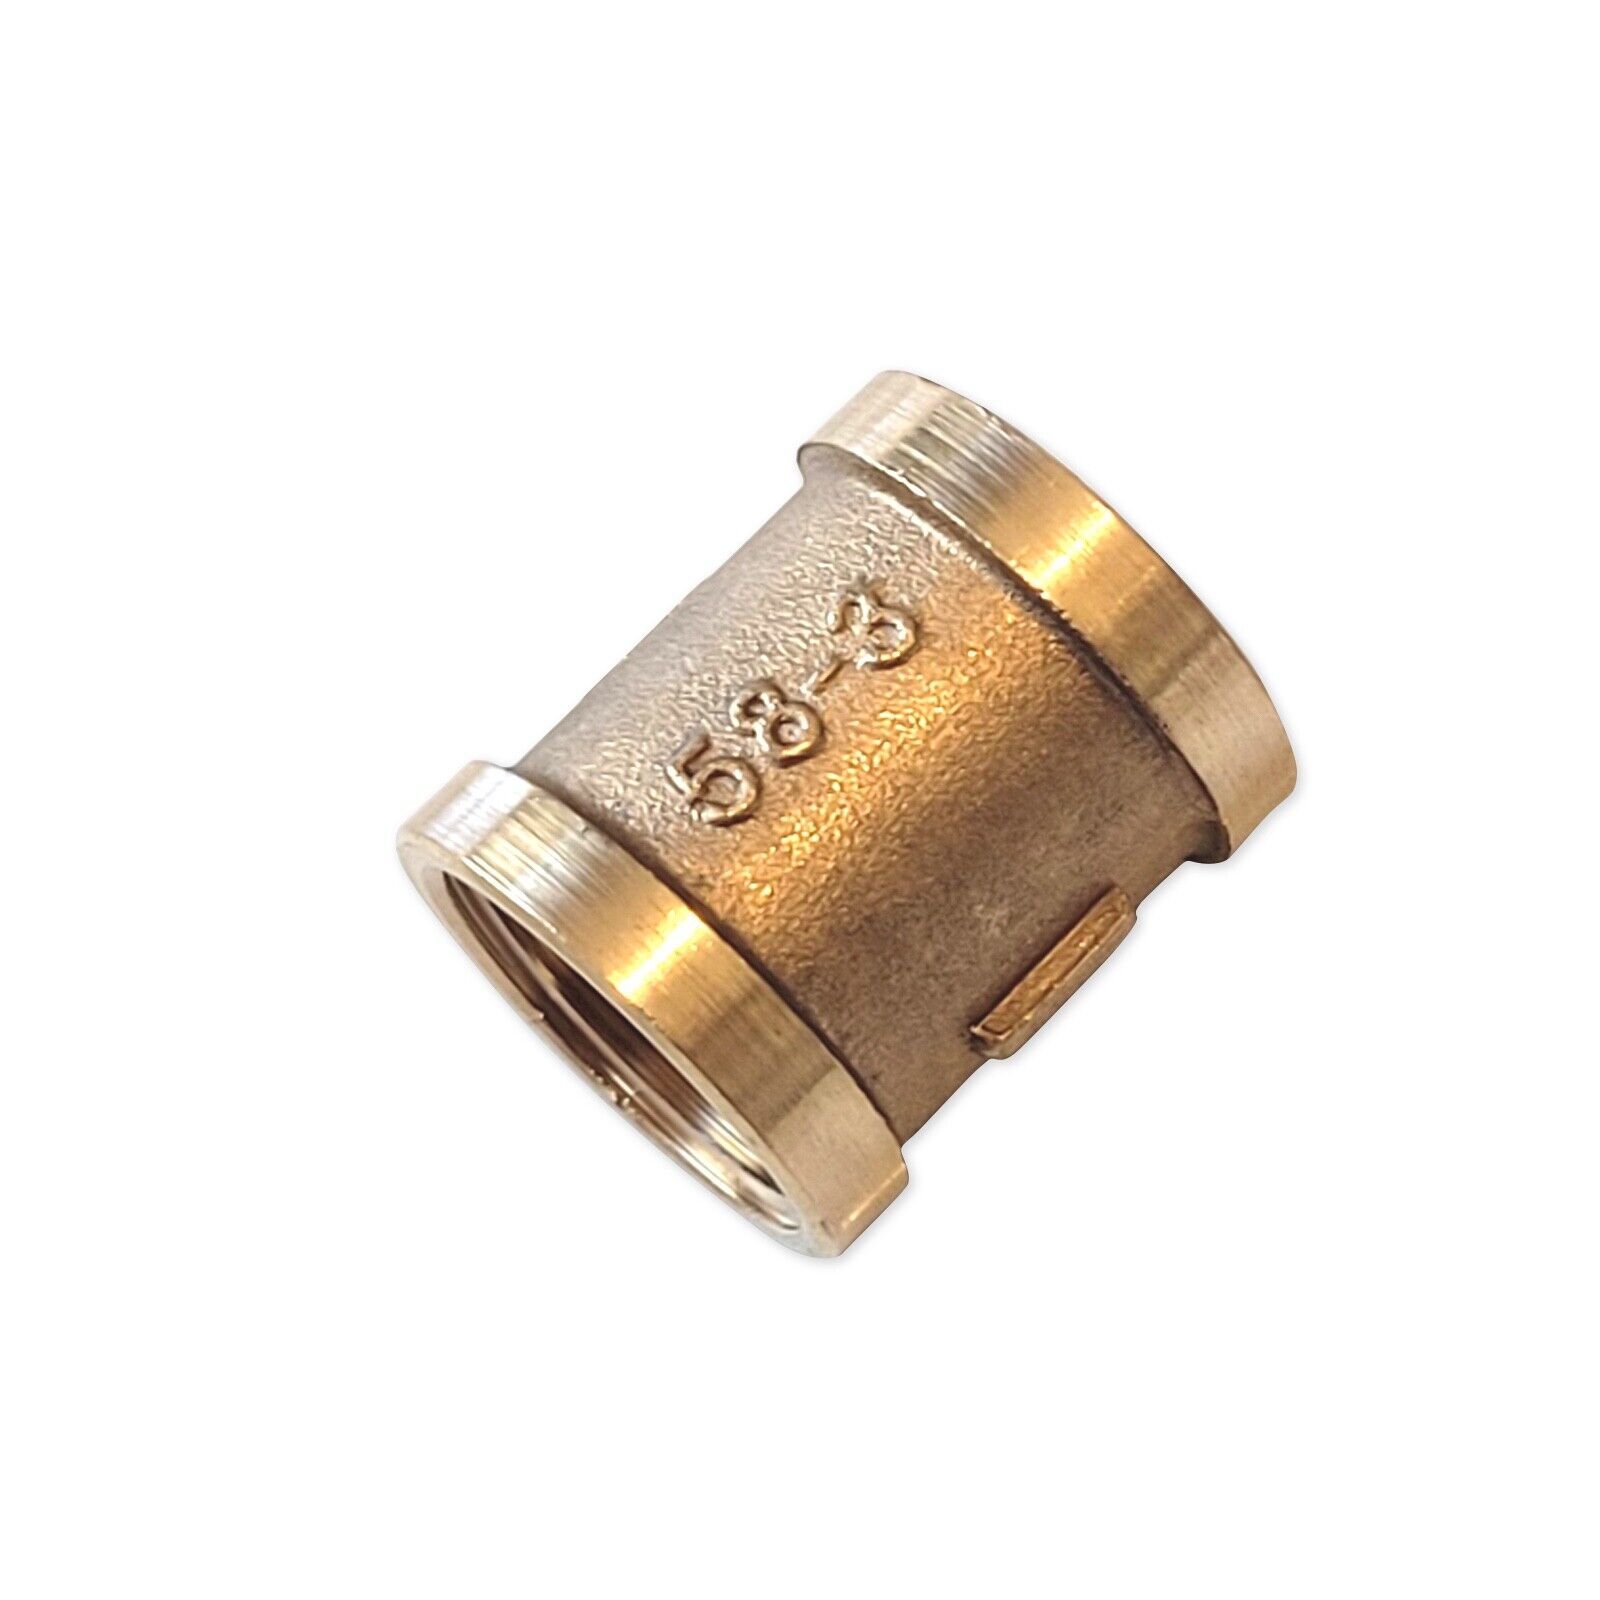 Primary image for G 1/2" Female Thread Brass Straight Coupling Connector